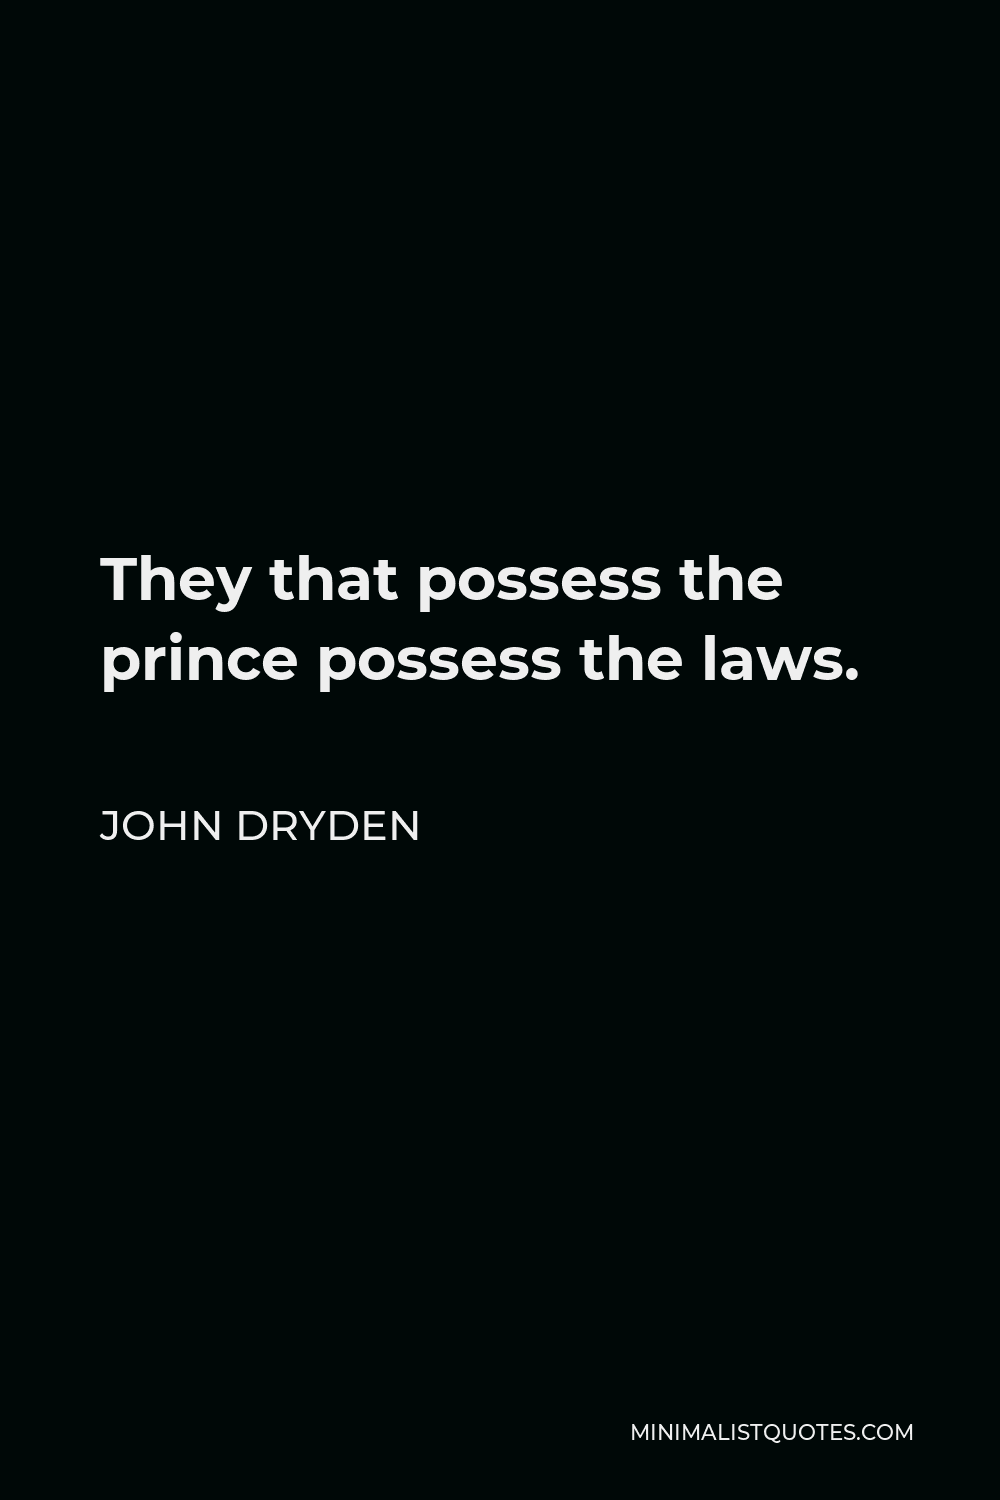 John Dryden Quote - They that possess the prince possess the laws.